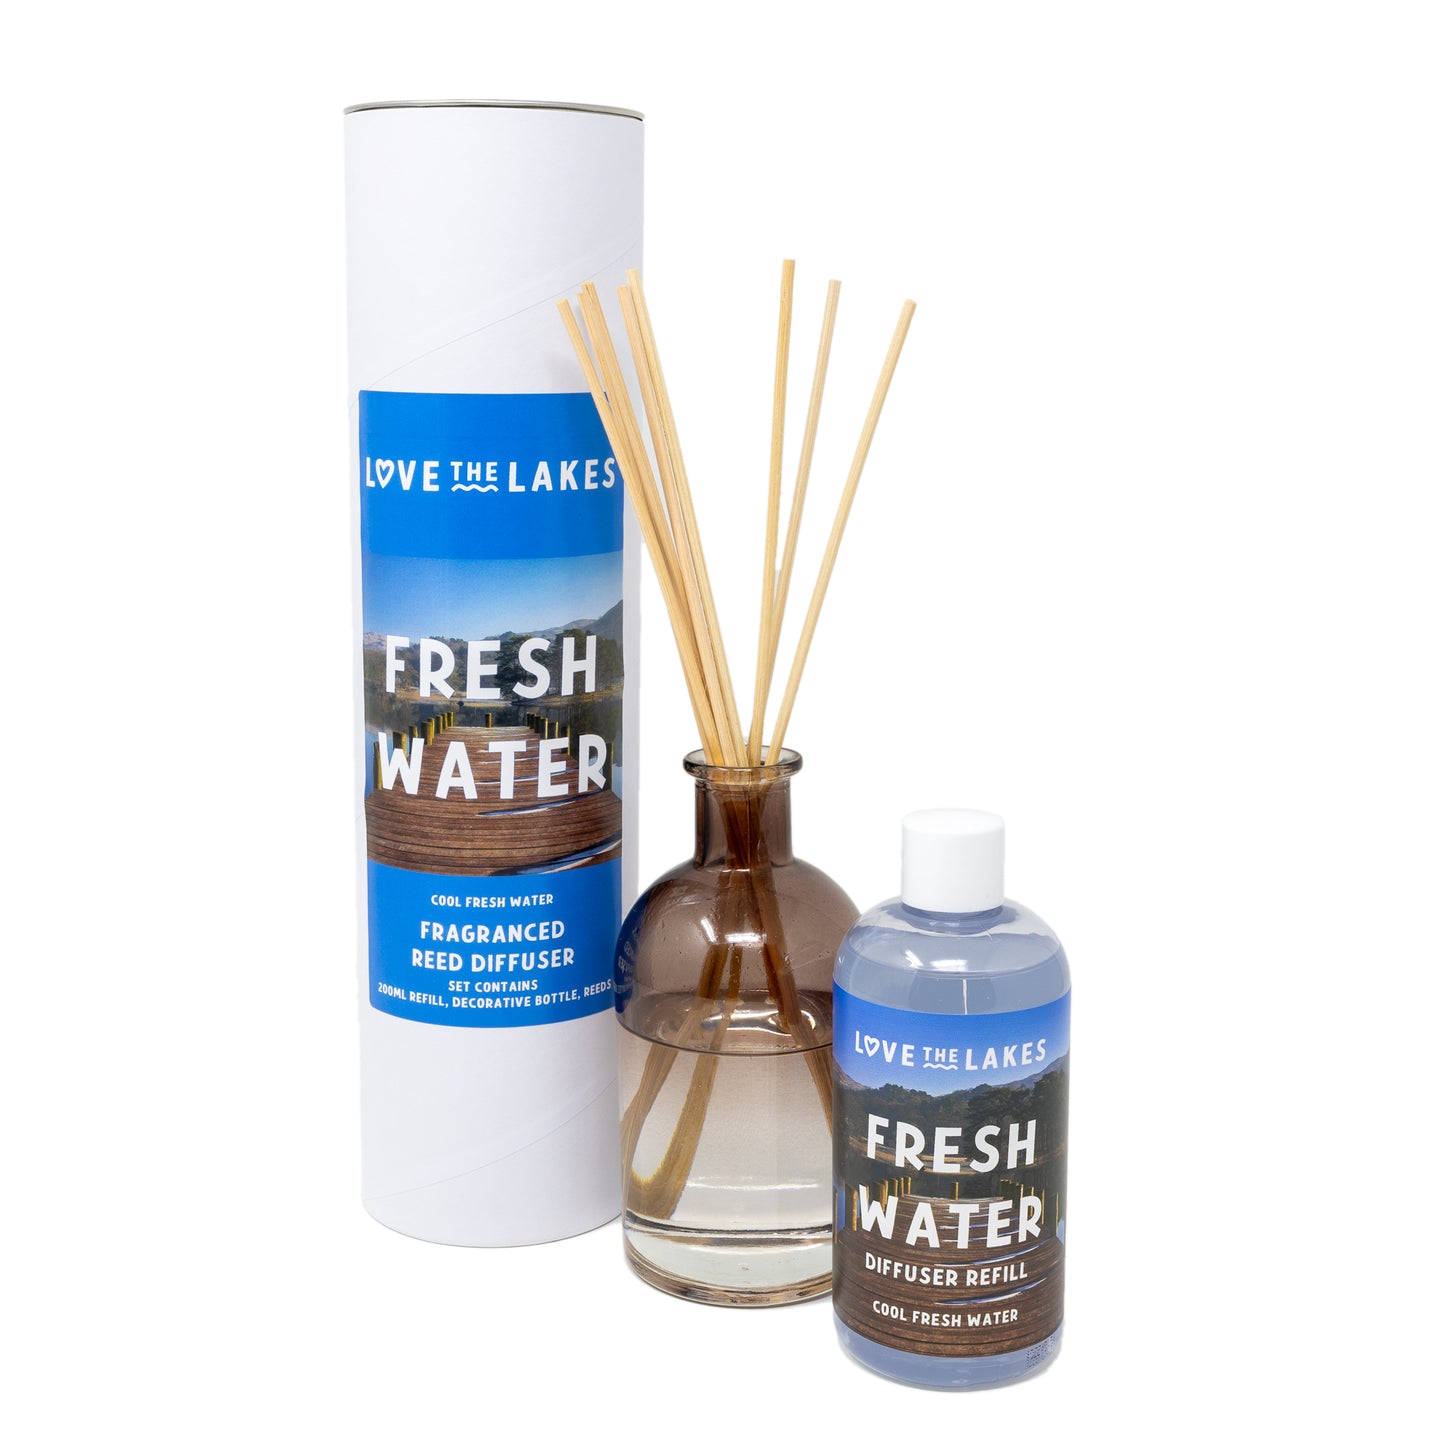 Love the Lakes Fresh Water Reed Diffuser Gift Set